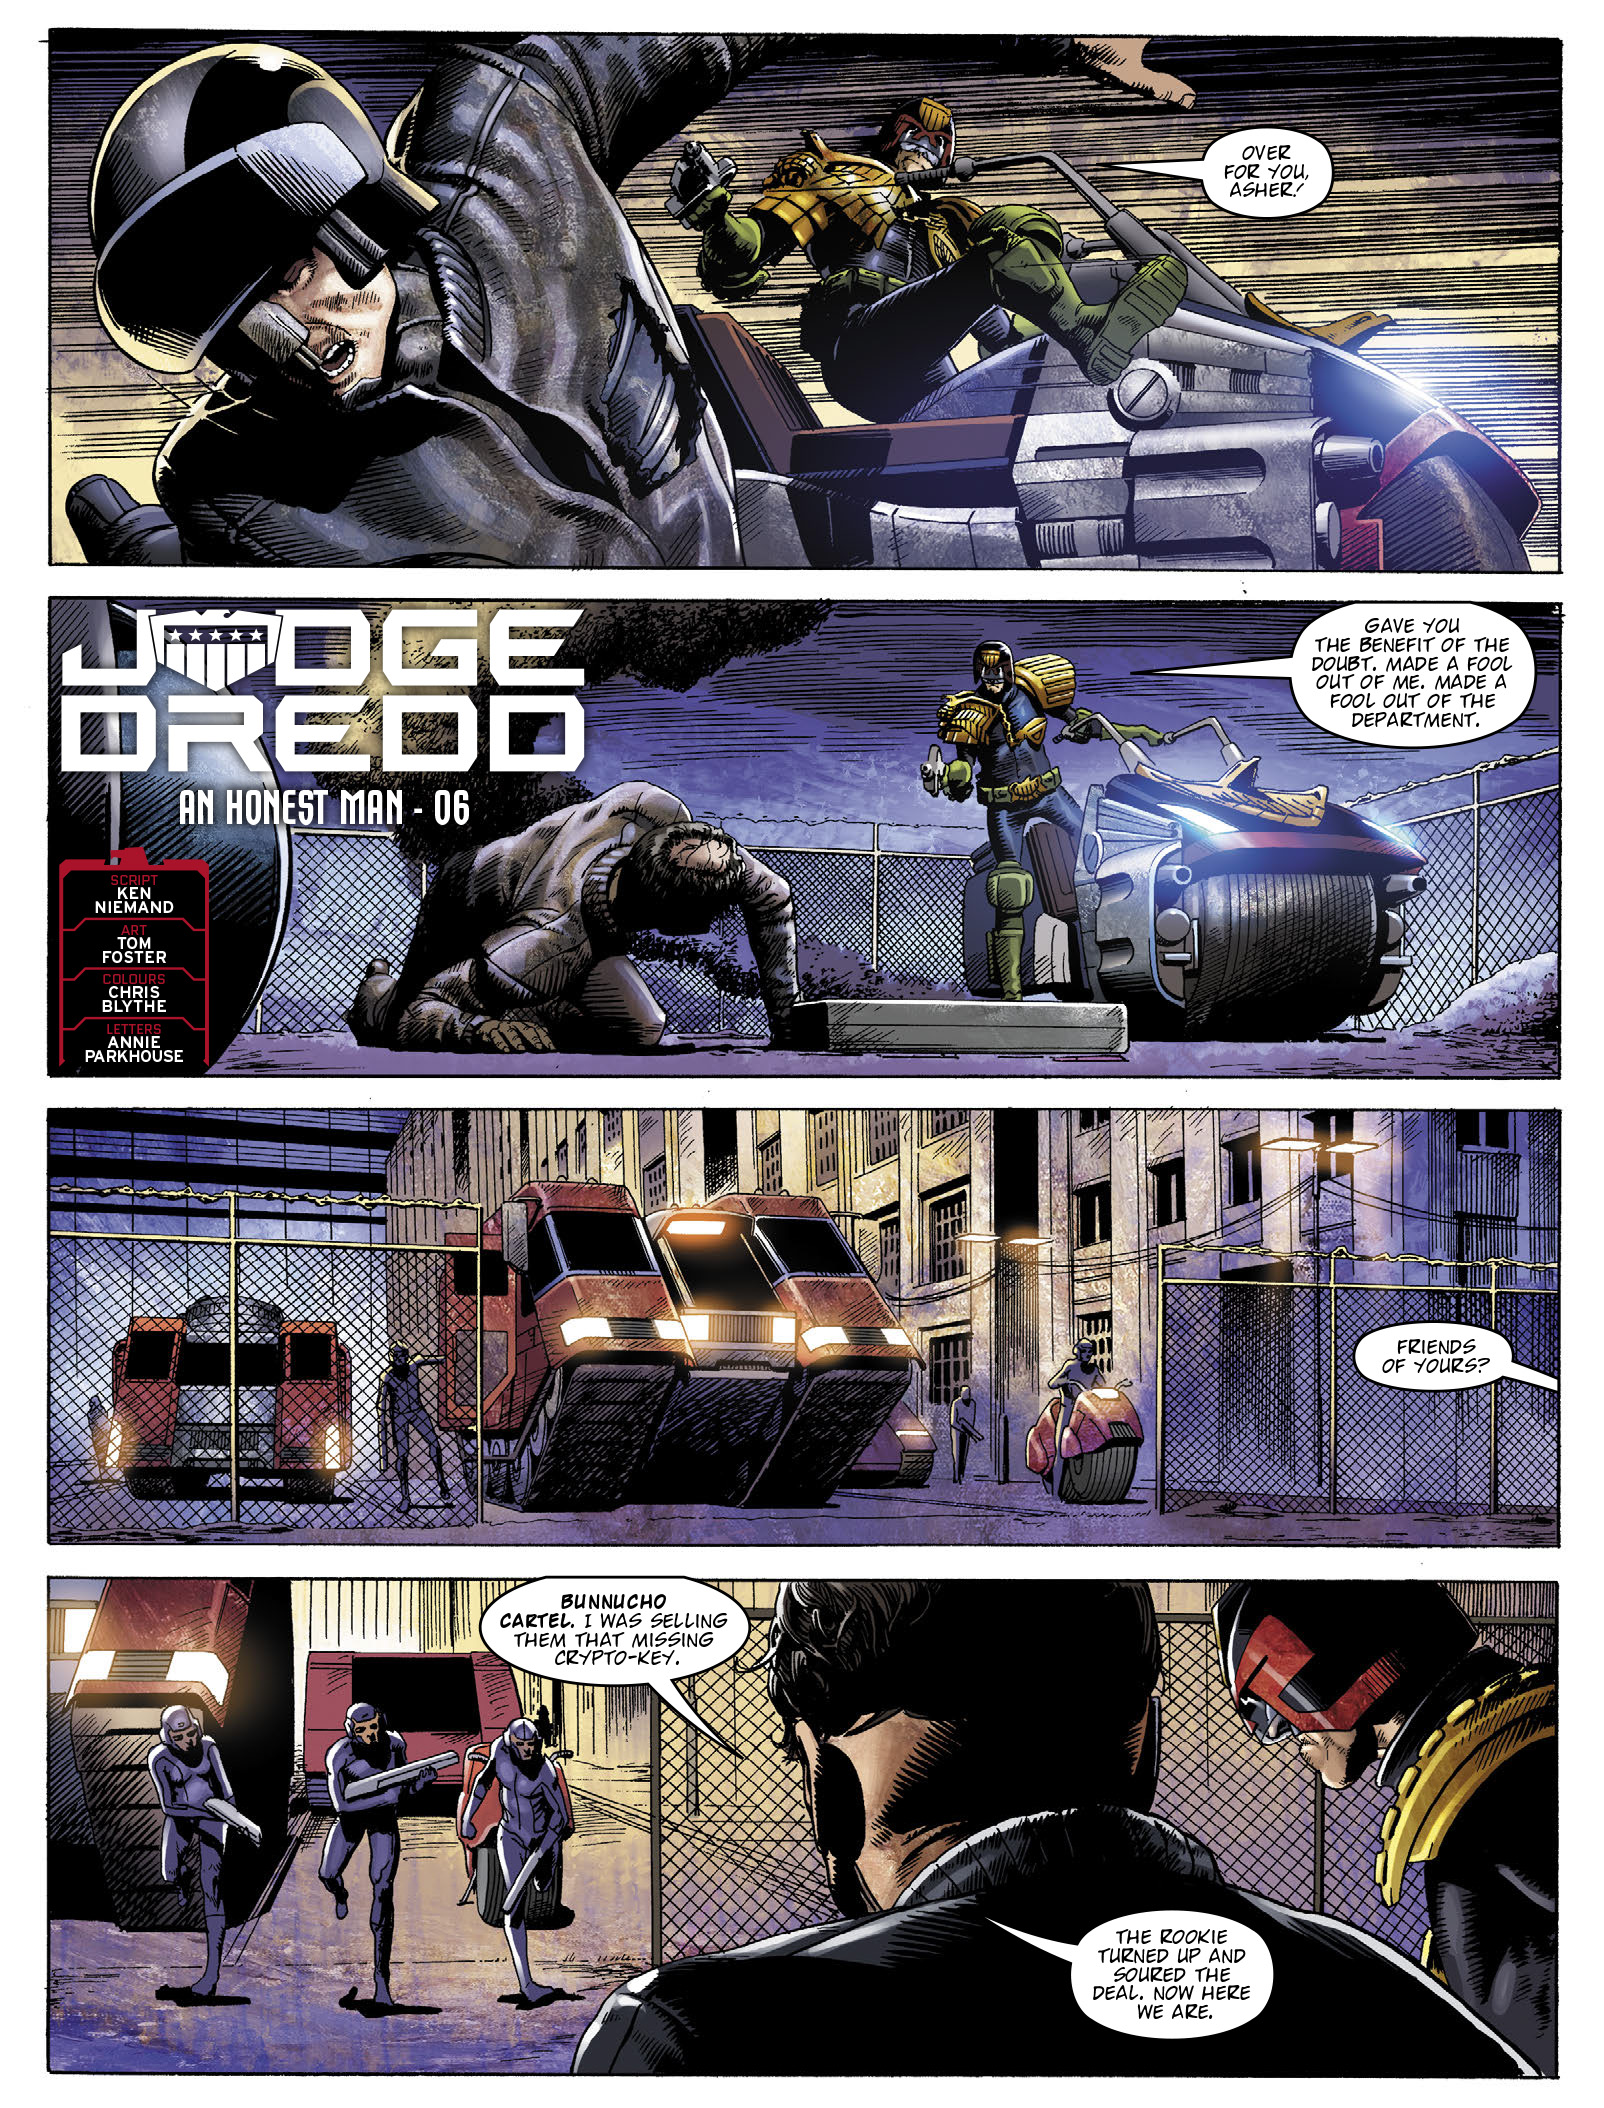 2000 AD: Chapter 2286 - Page 3